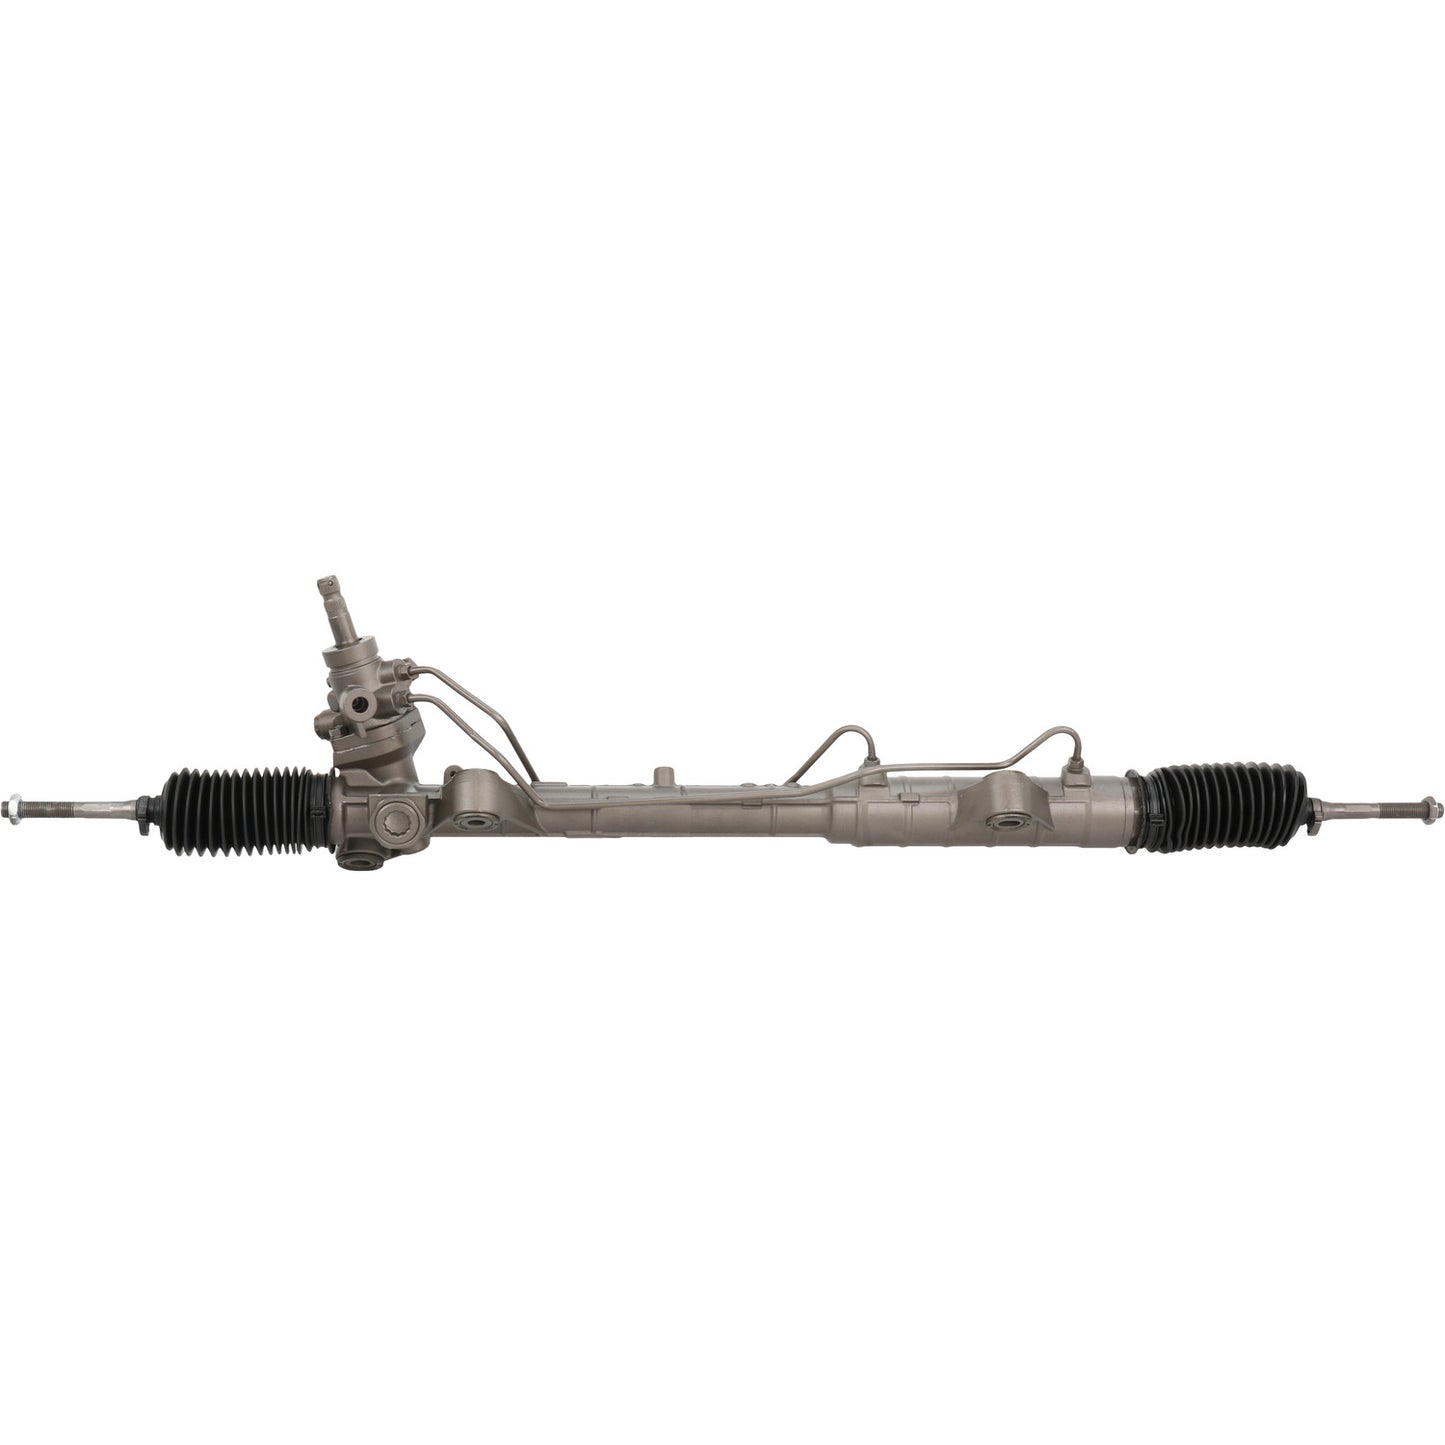 Rack and Pinion Assembly - MAVAL - Hydraulic Power - Remanufactured - 95416M